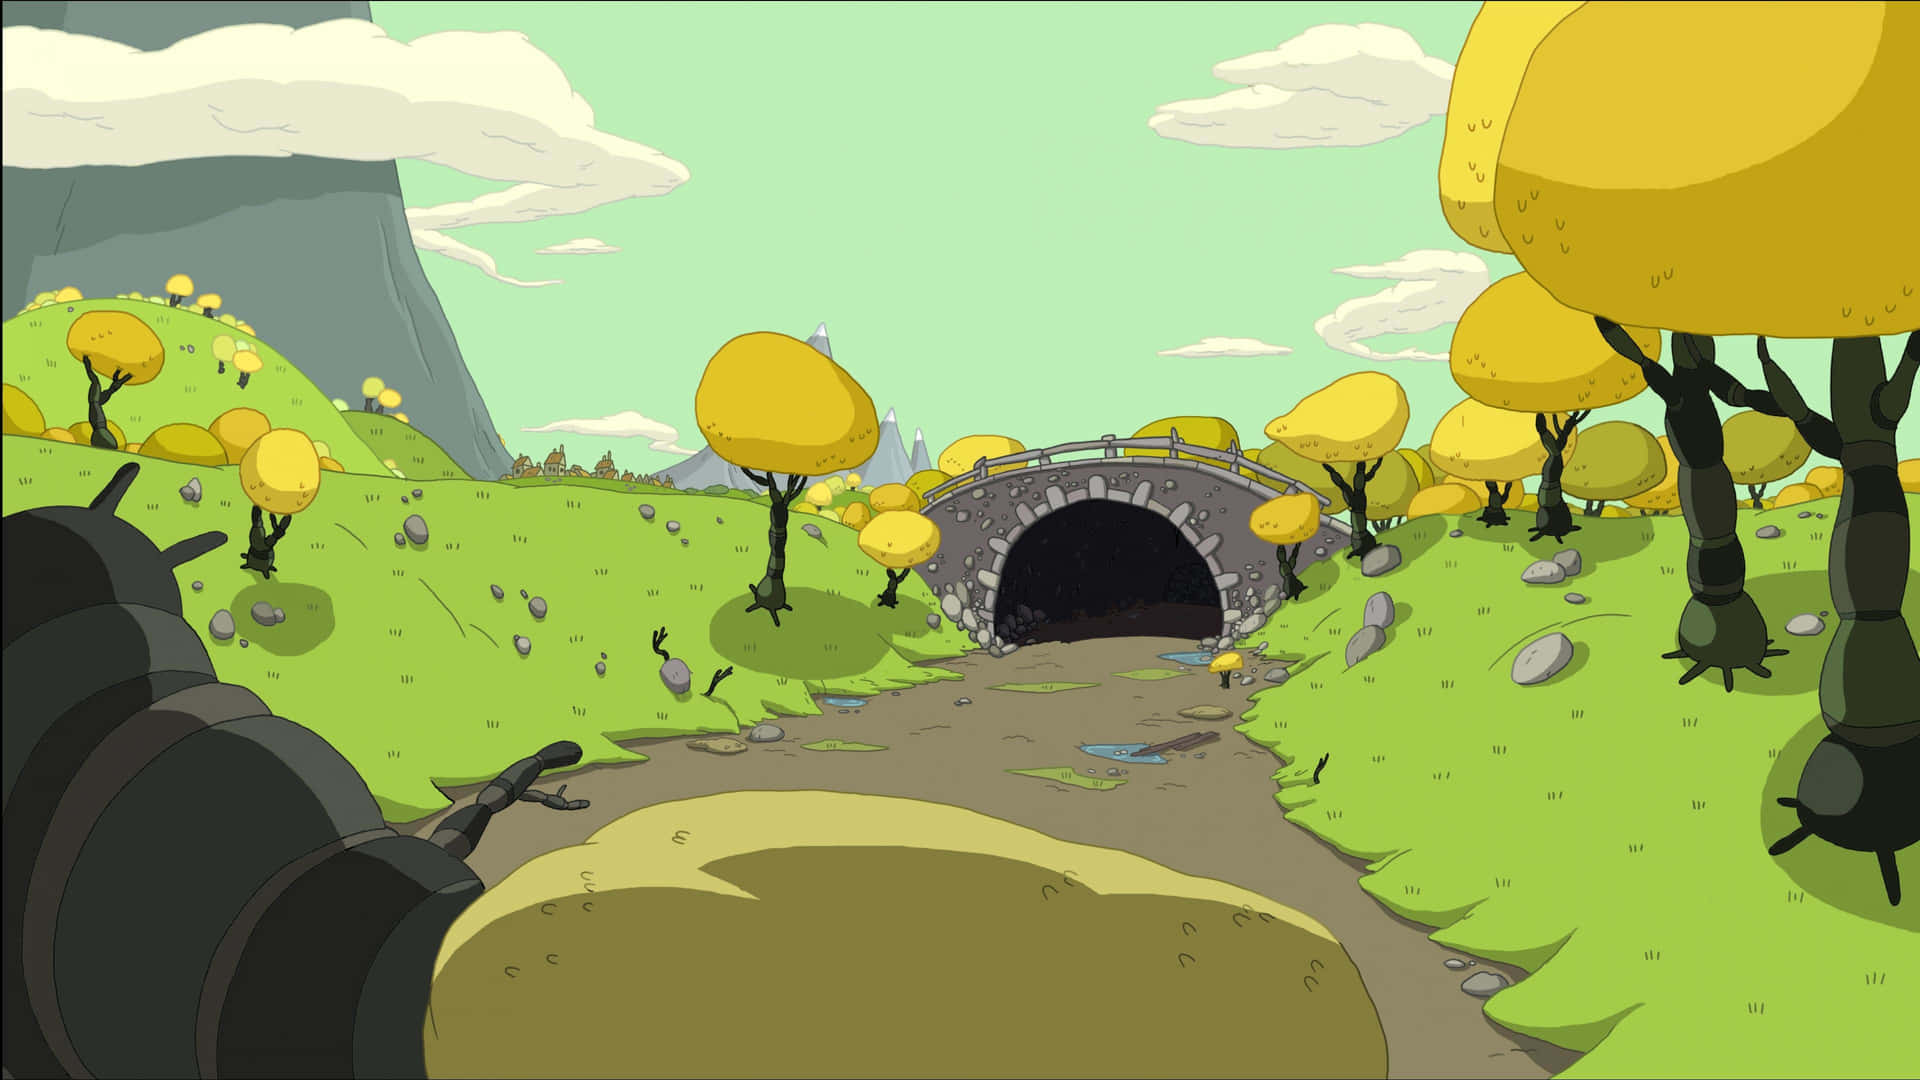 A Colorful Adventure Awaits in the Landscape of Adventure Time Wallpaper